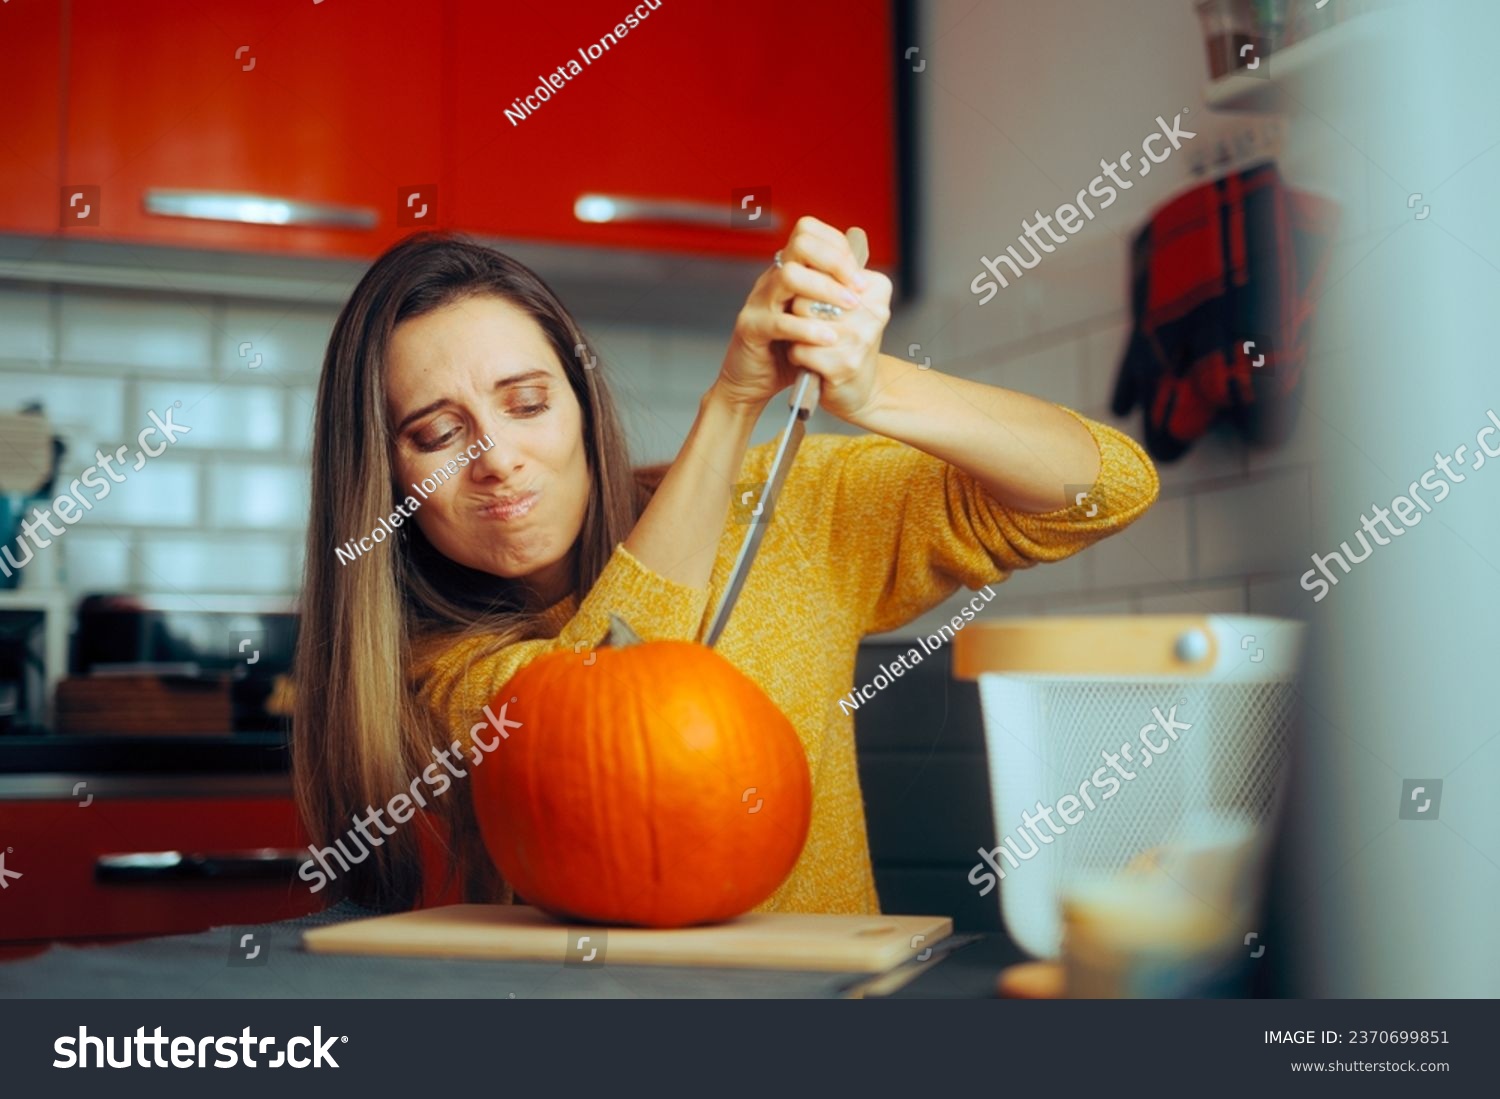 
Woman Holding a Knife Ready to Carve a Halloween Pumpkin. Stressed lady feeling bored thinking what to cook for autumnal holidays
 #2370699851